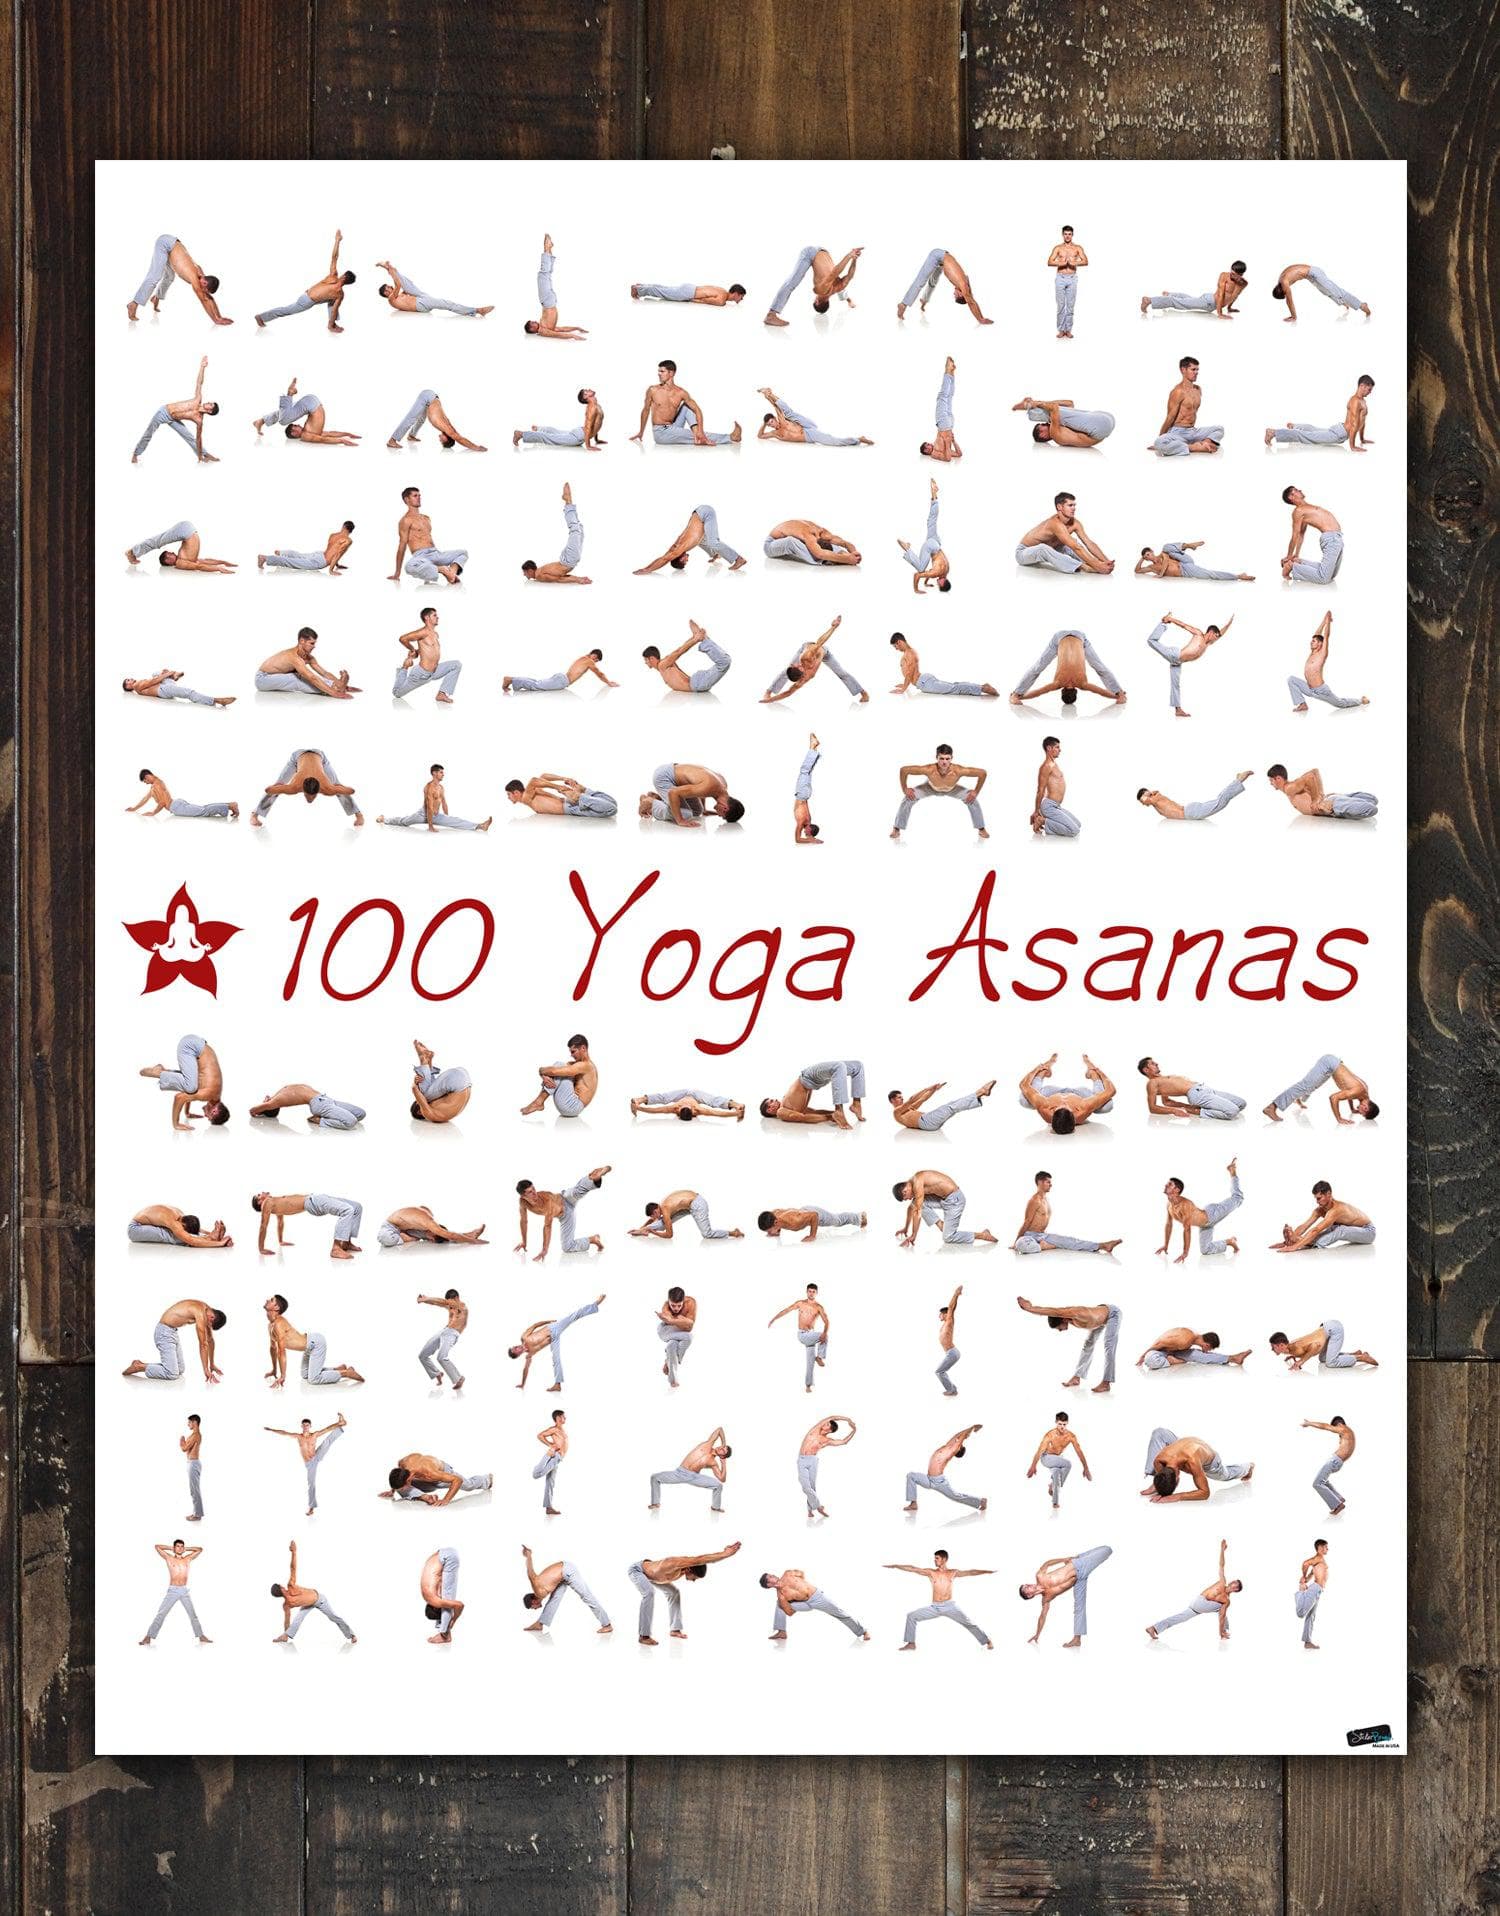 100 Yoga Poses Asanas Poster. Instructional Graphic Poster for